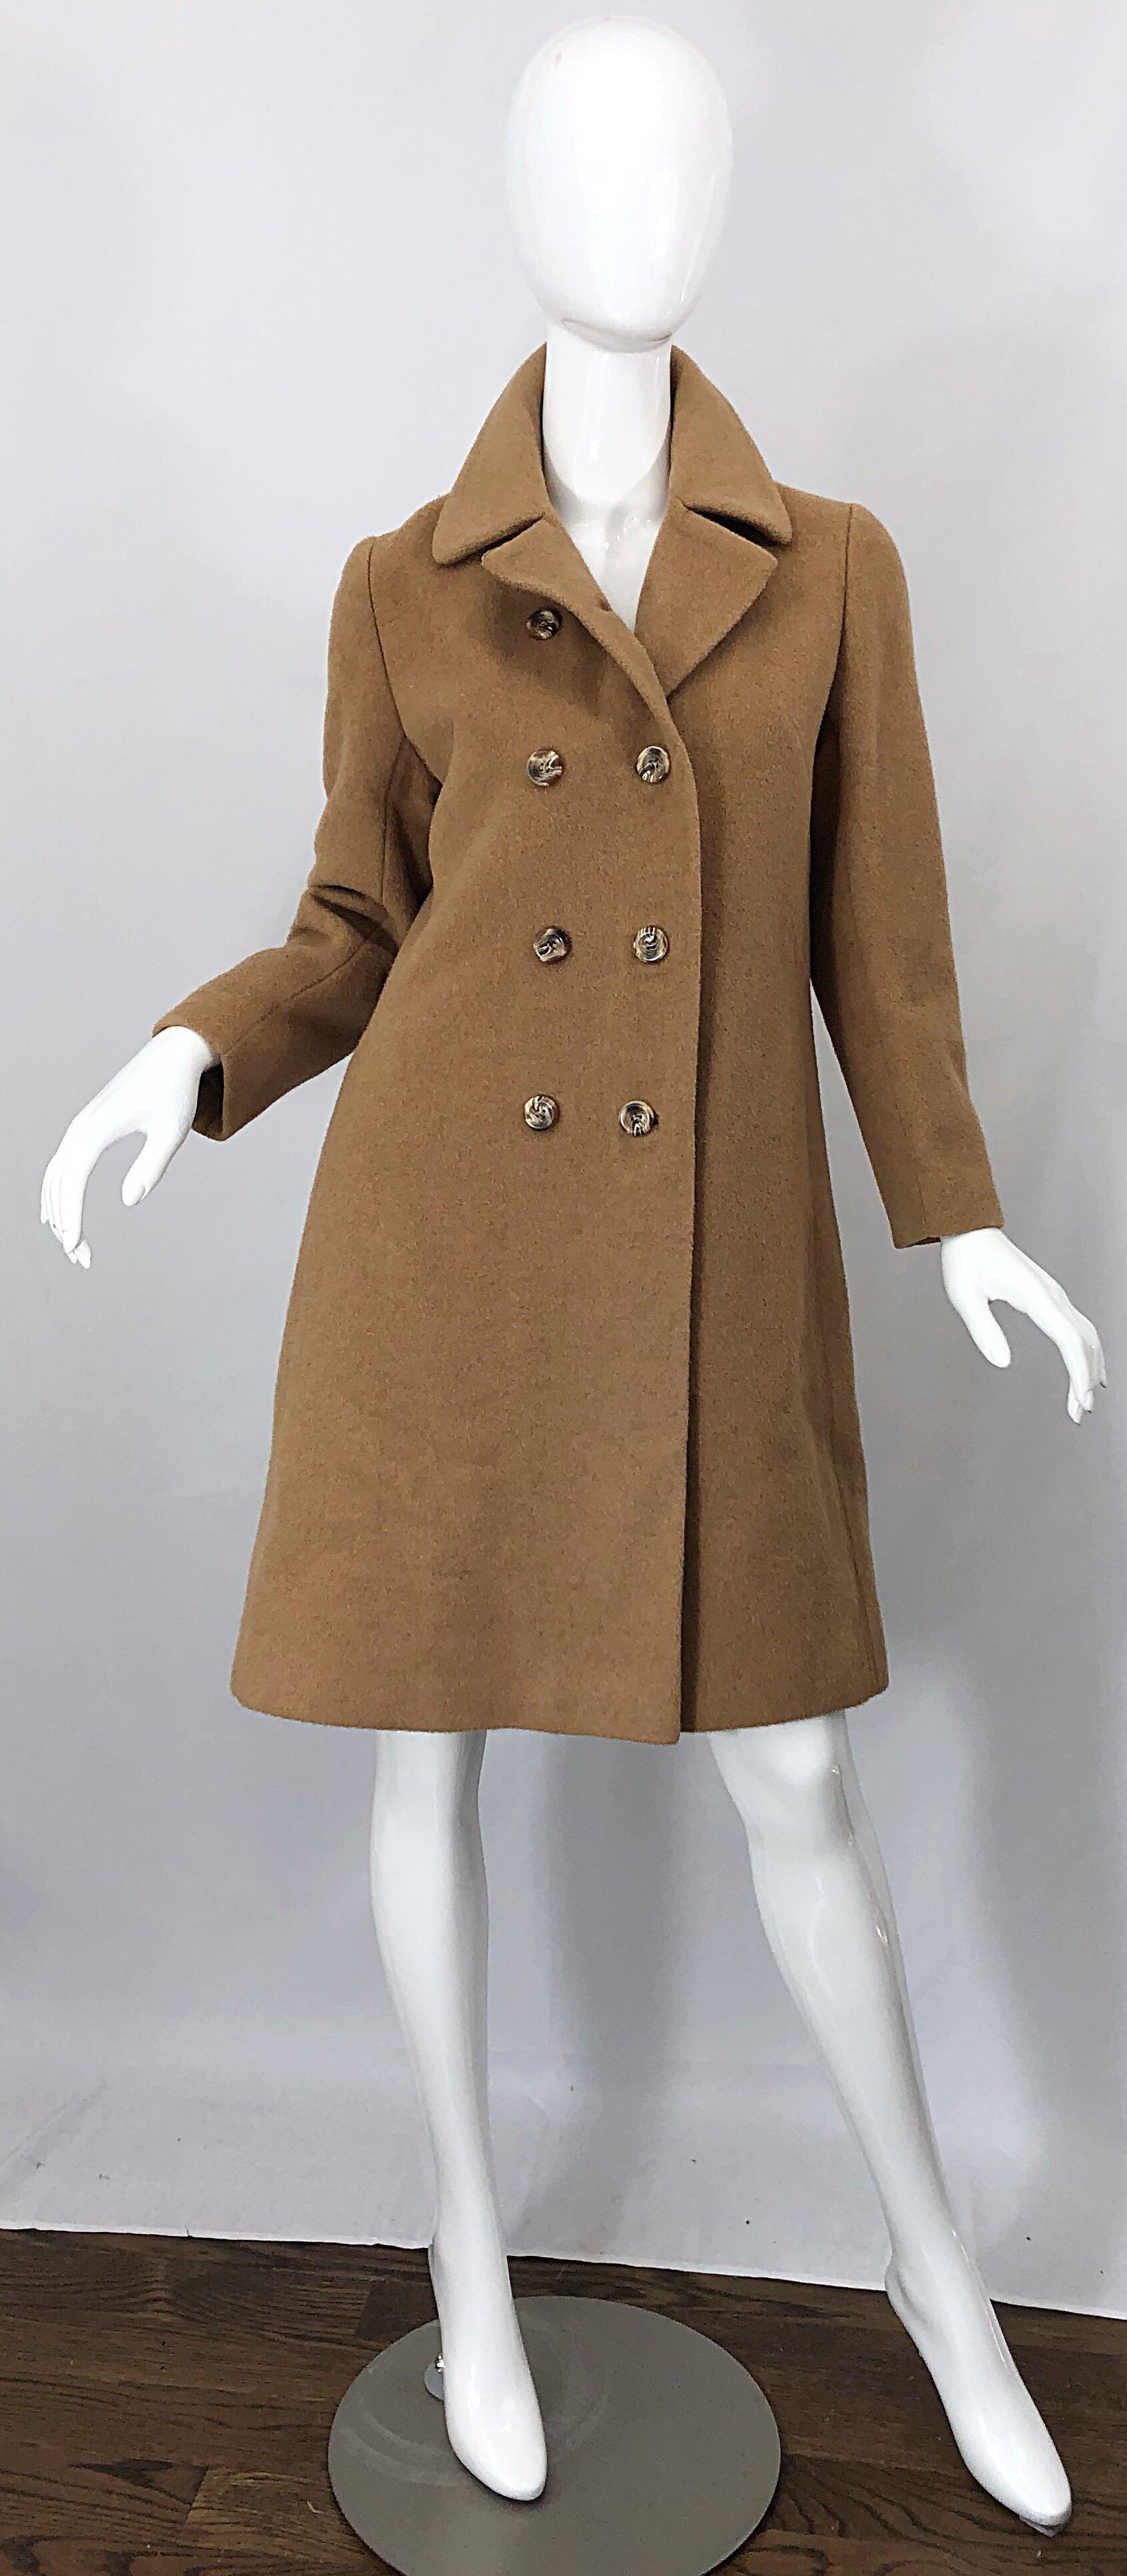 Chic 1960s Camel Tan Camels Hair Wool Double Breasted Vintage Swing Jacket Coat 6